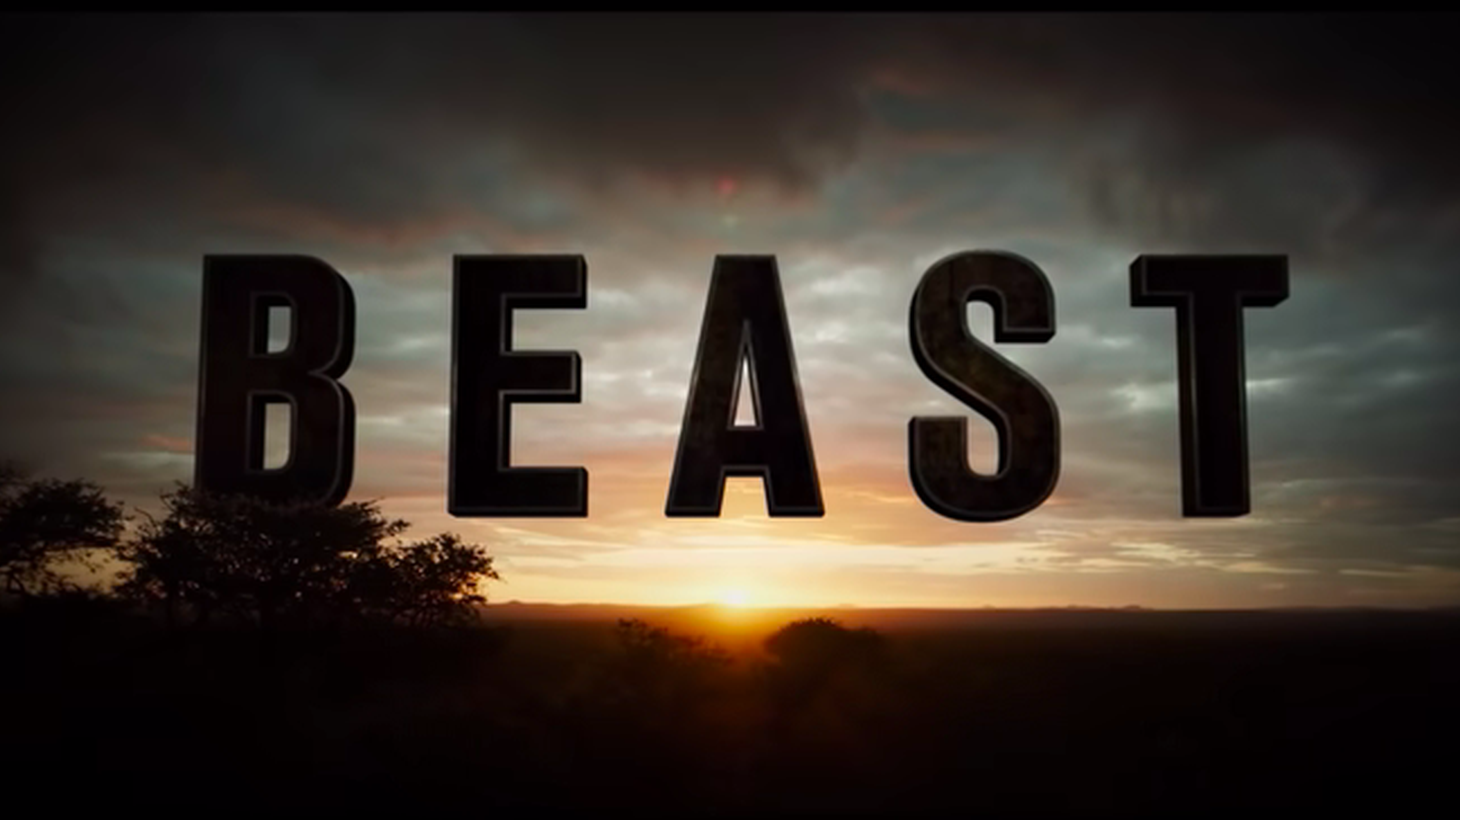 “Beast” stars Idris Elba as a father trying to protect his teenaged daughters from a lion terrorizing the South African savannah.